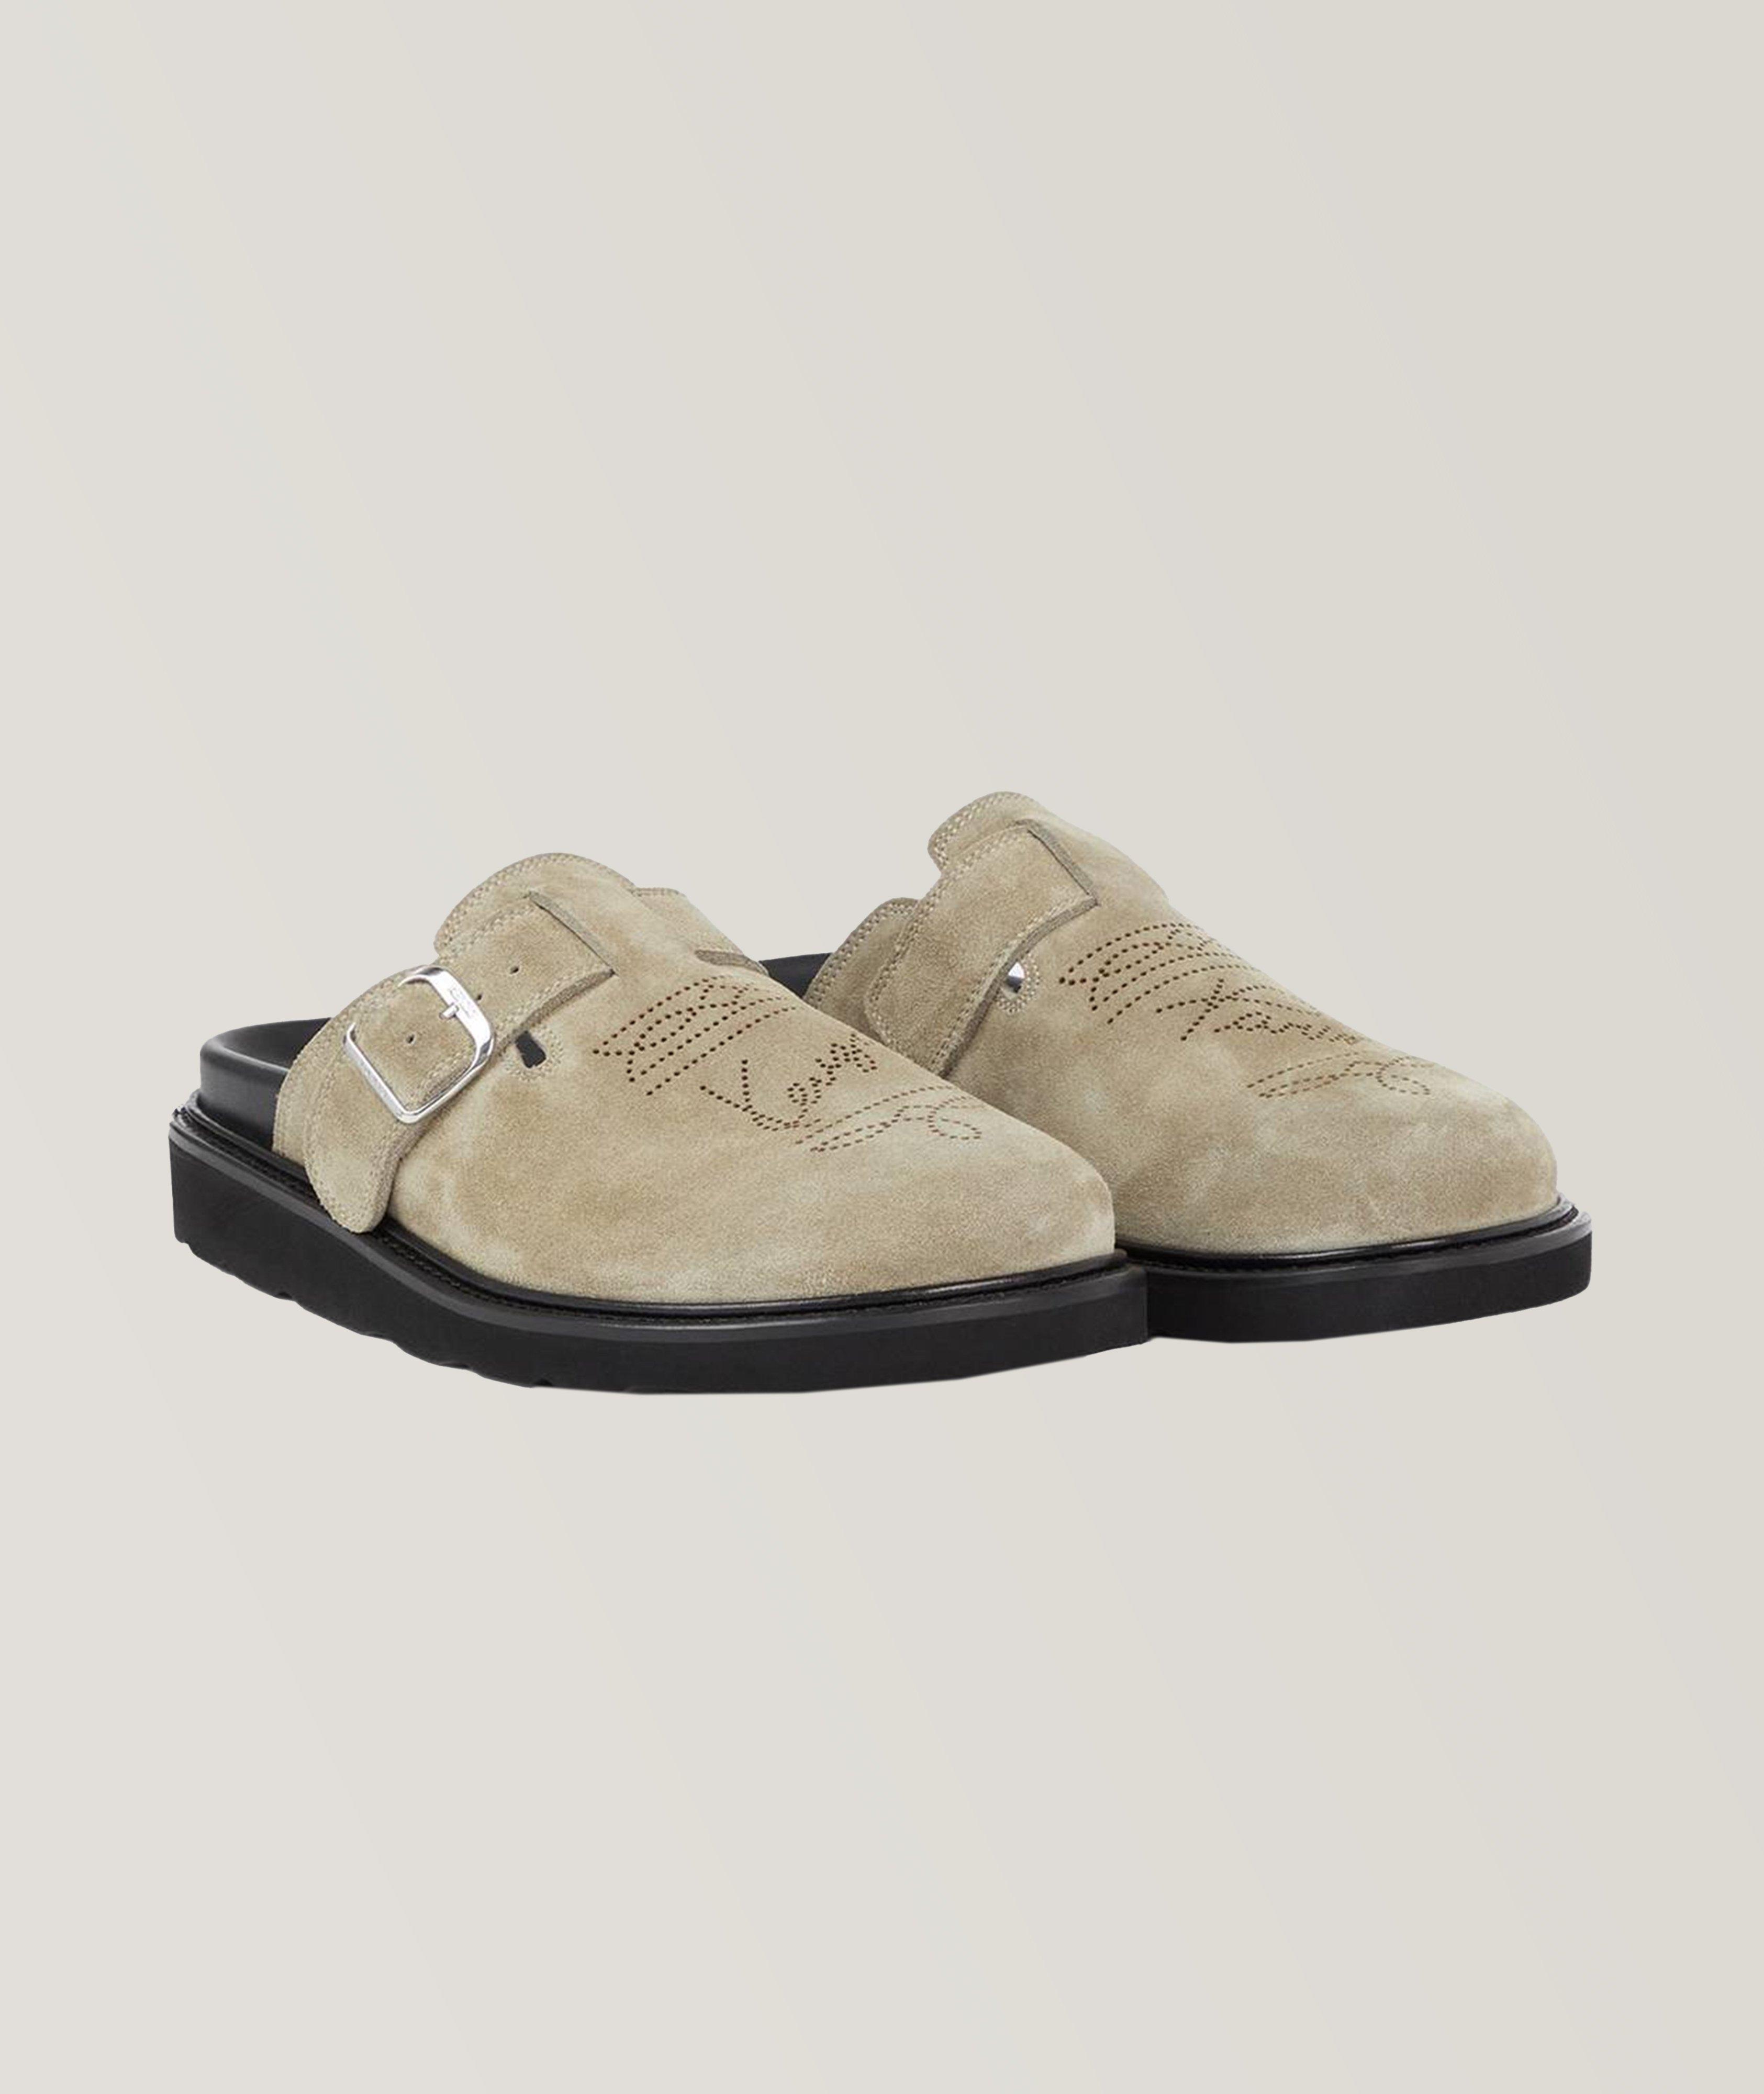 Matto Suede-Leather Clogs